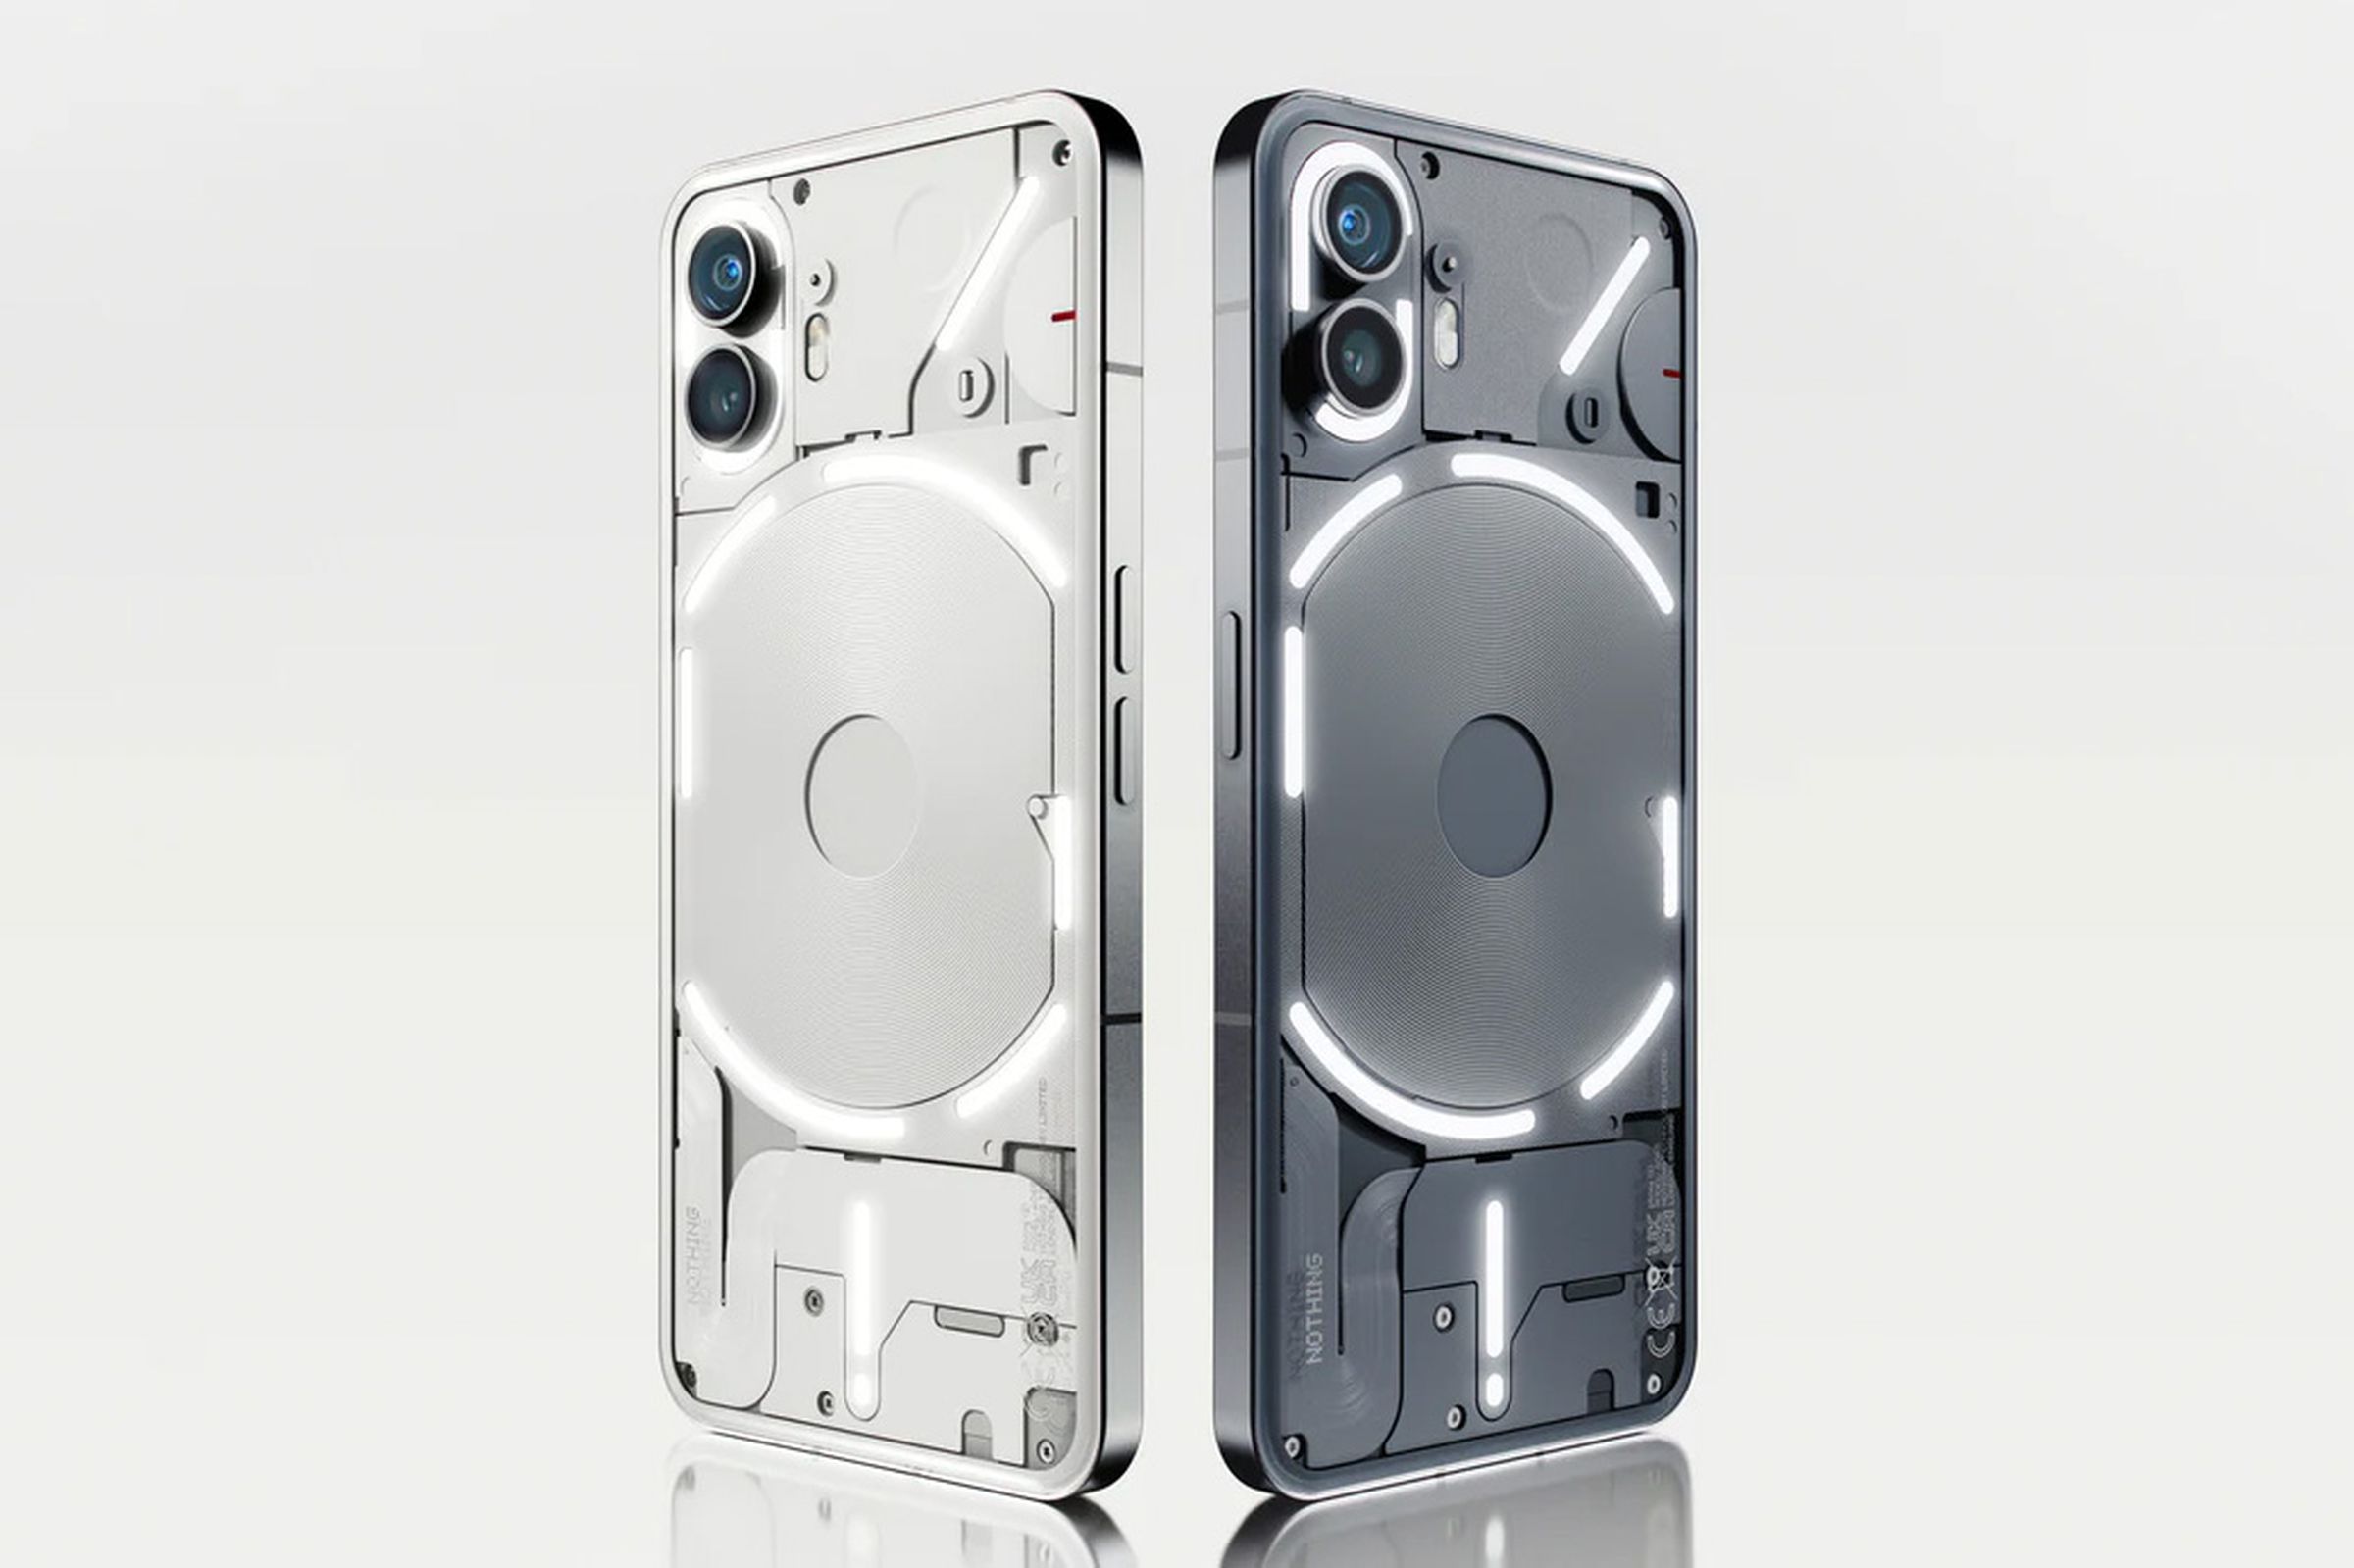 The Nothing Phone 2 in white and gray.